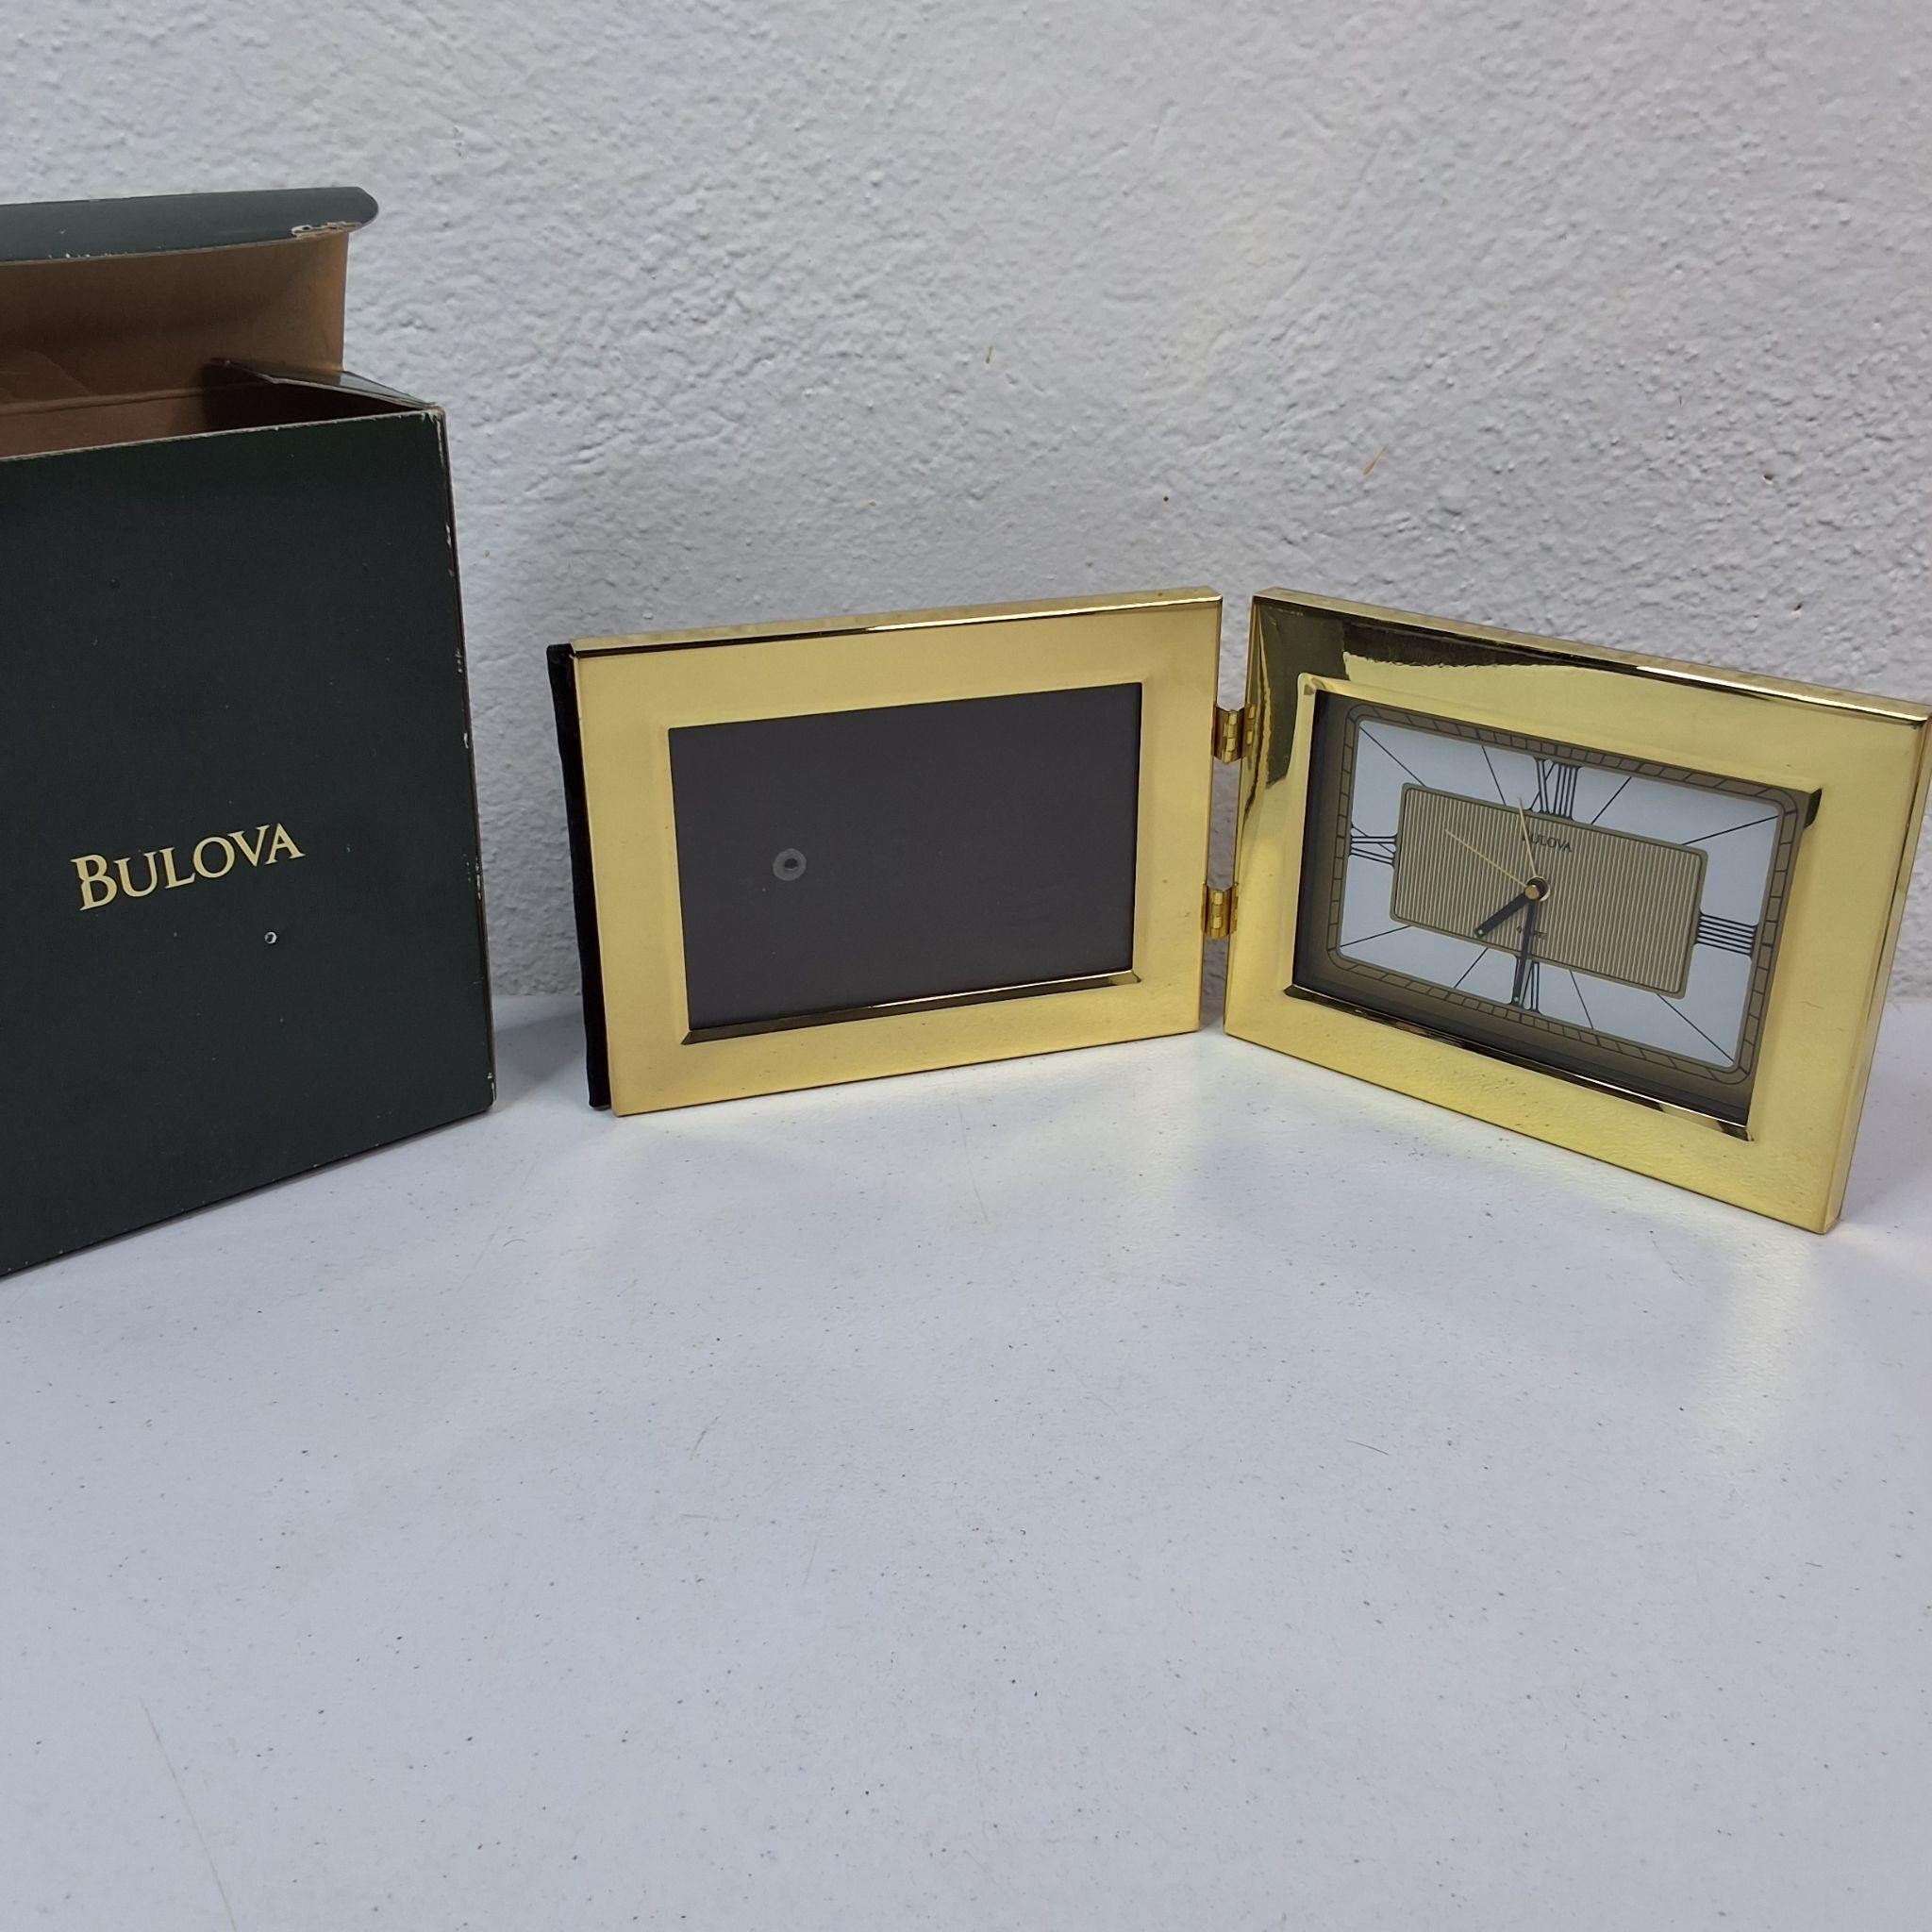 BULOVA CLOCK AND PICTURE FRAME